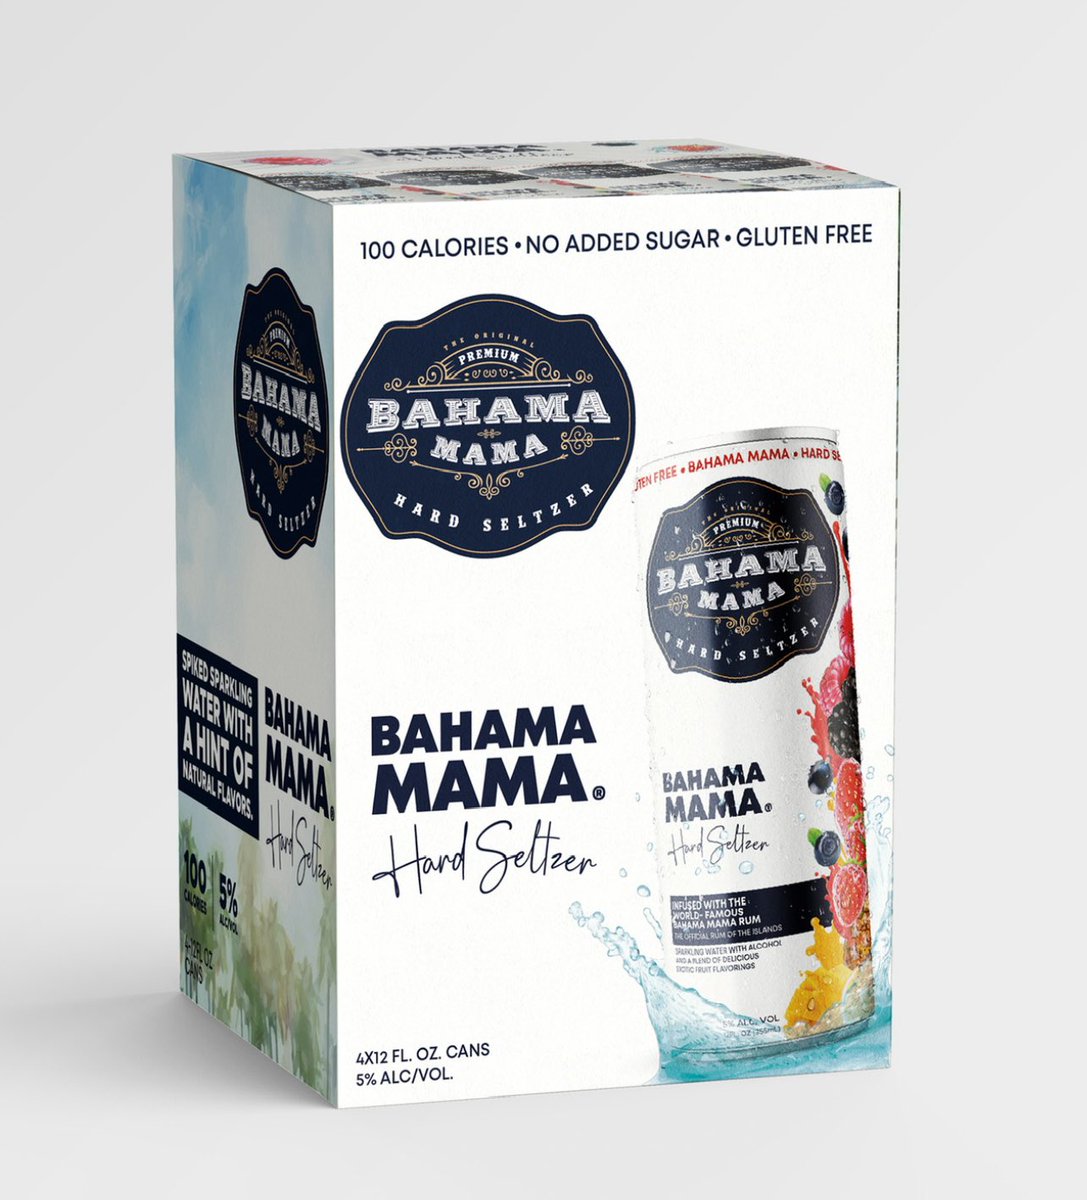 Bahama Mama hard seltzer, infused with the world- famous Bahama Mama Rum “the official Rum of the islands” coming to a total Wine and spirits near you. @bahamamamarum #bahamamama #islandrum #tortugamusicfestival #bahamasstrong🇧🇸💪 #bahamas🇧🇸